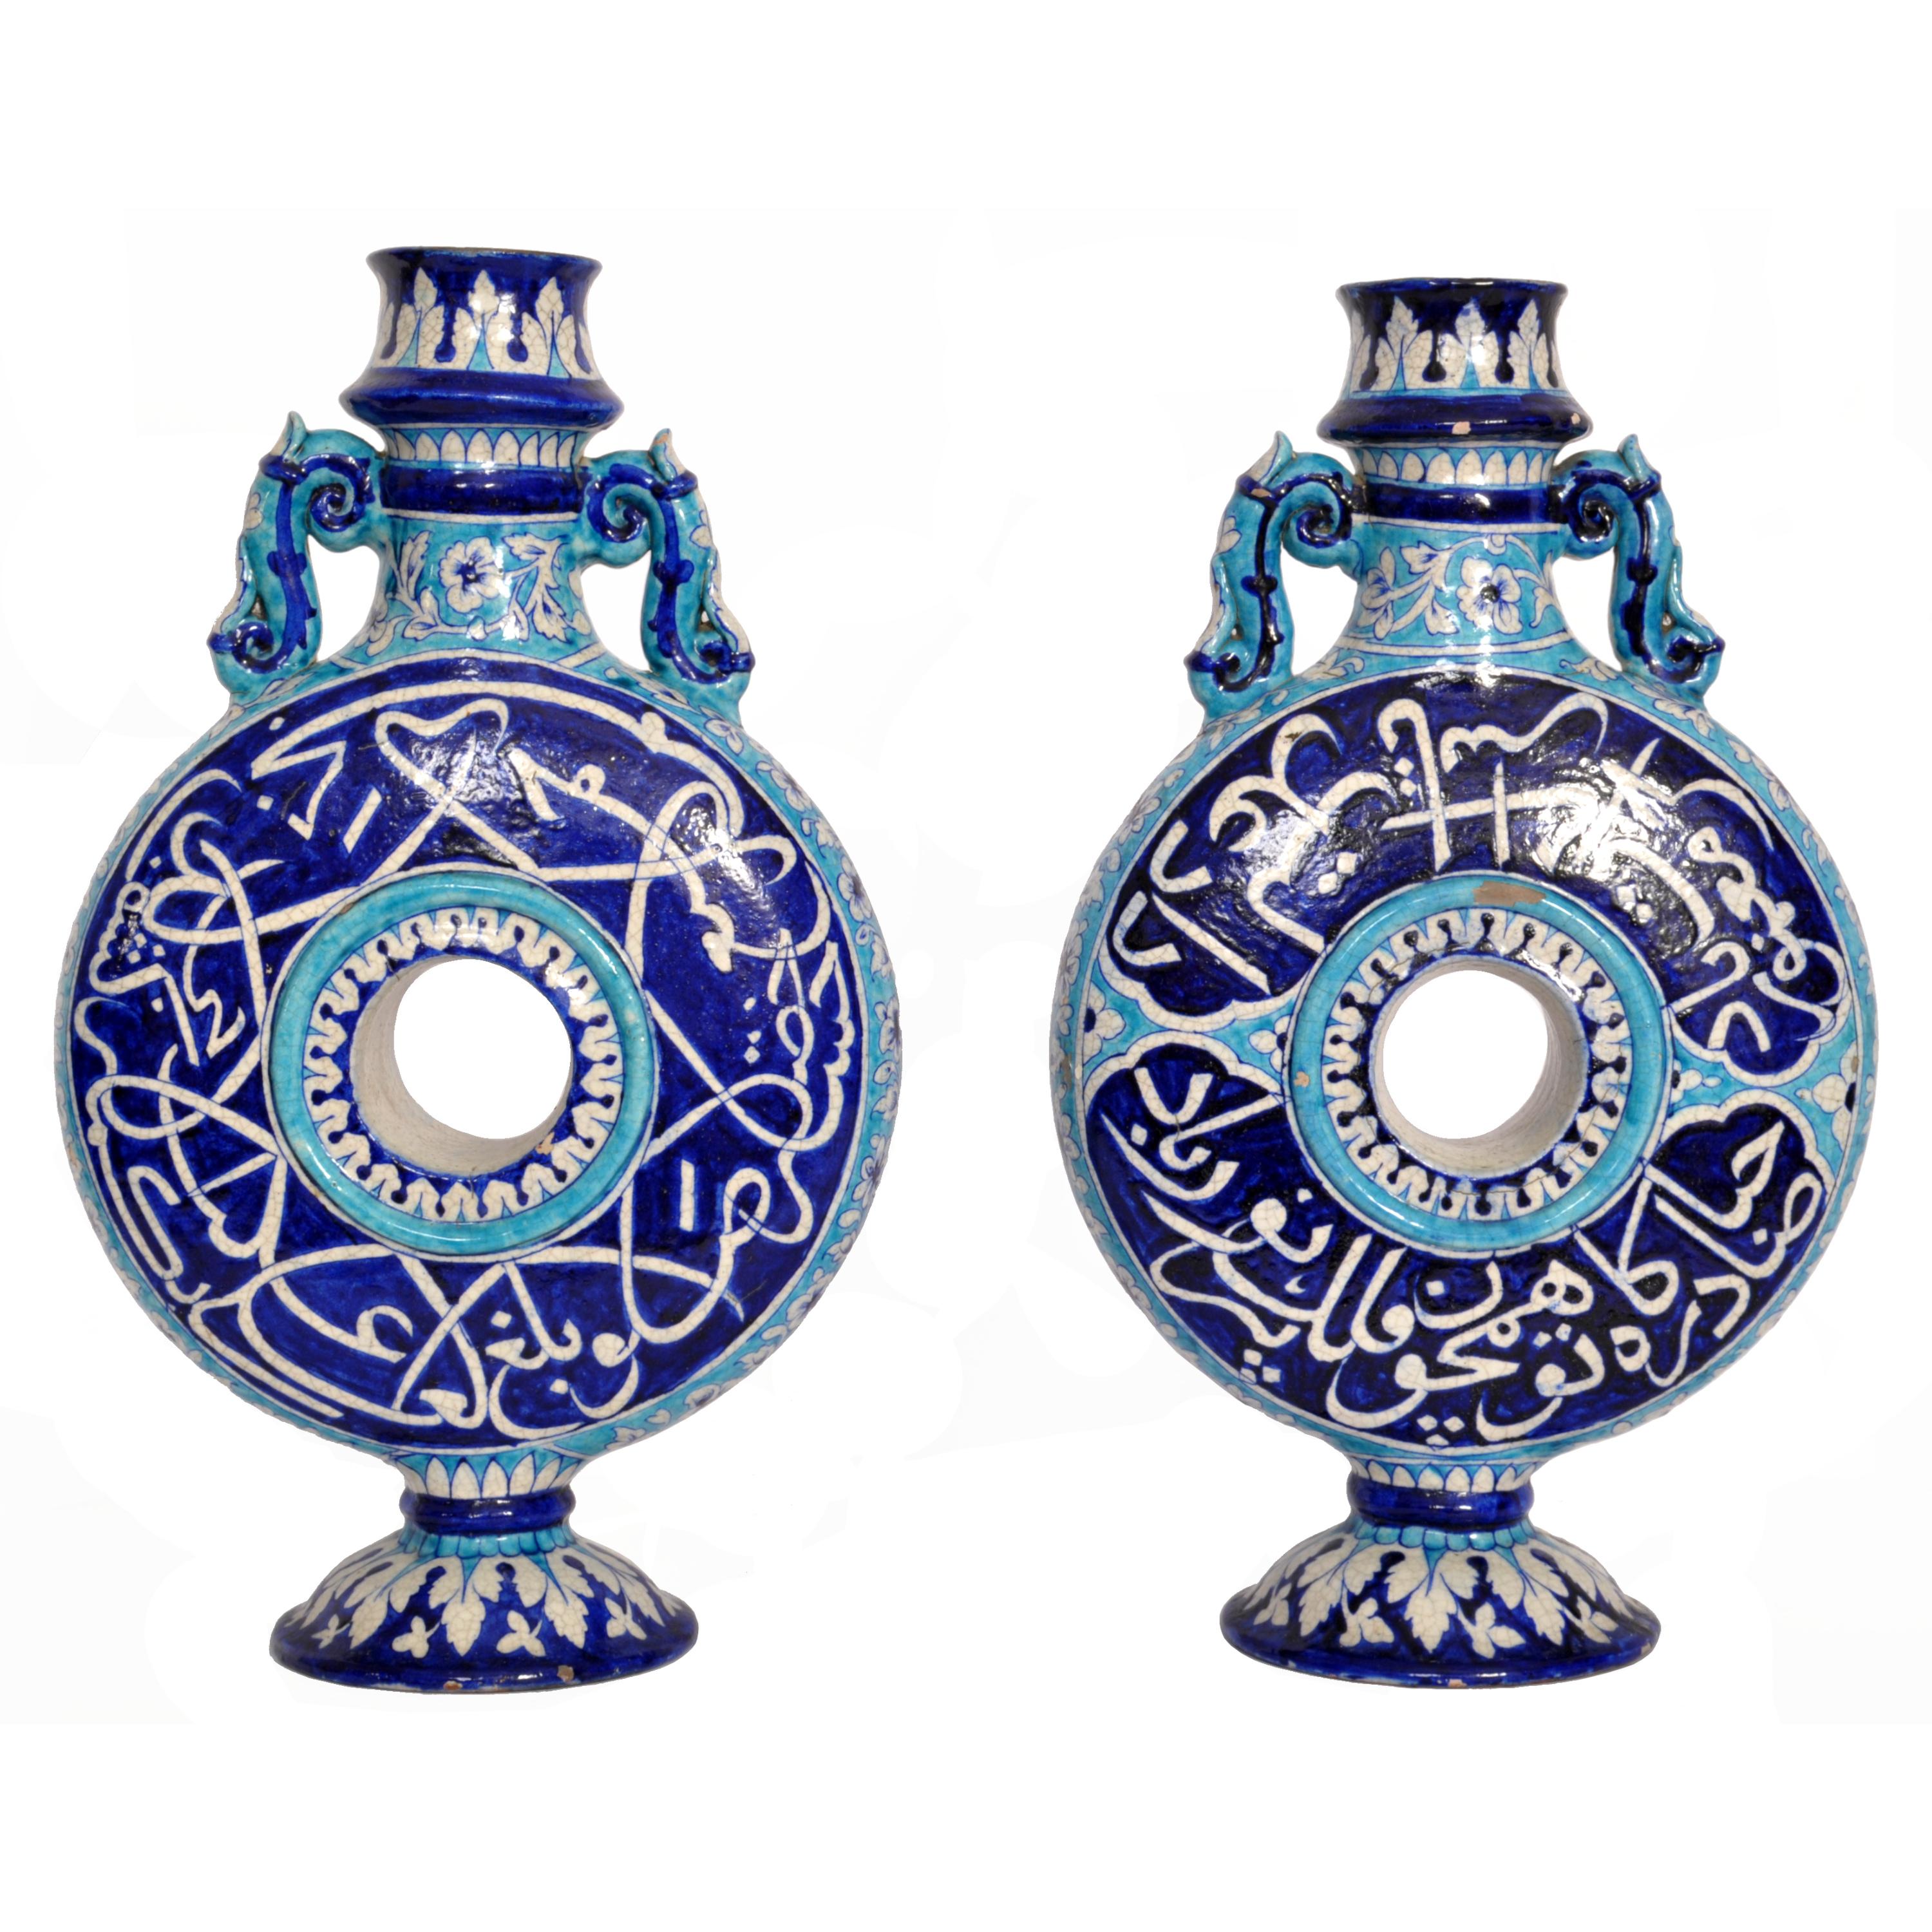 Mid-19th Century Pair Antique Indian Sindh Multan Islamic Caligraphy Pottery Moon Flasks 1850